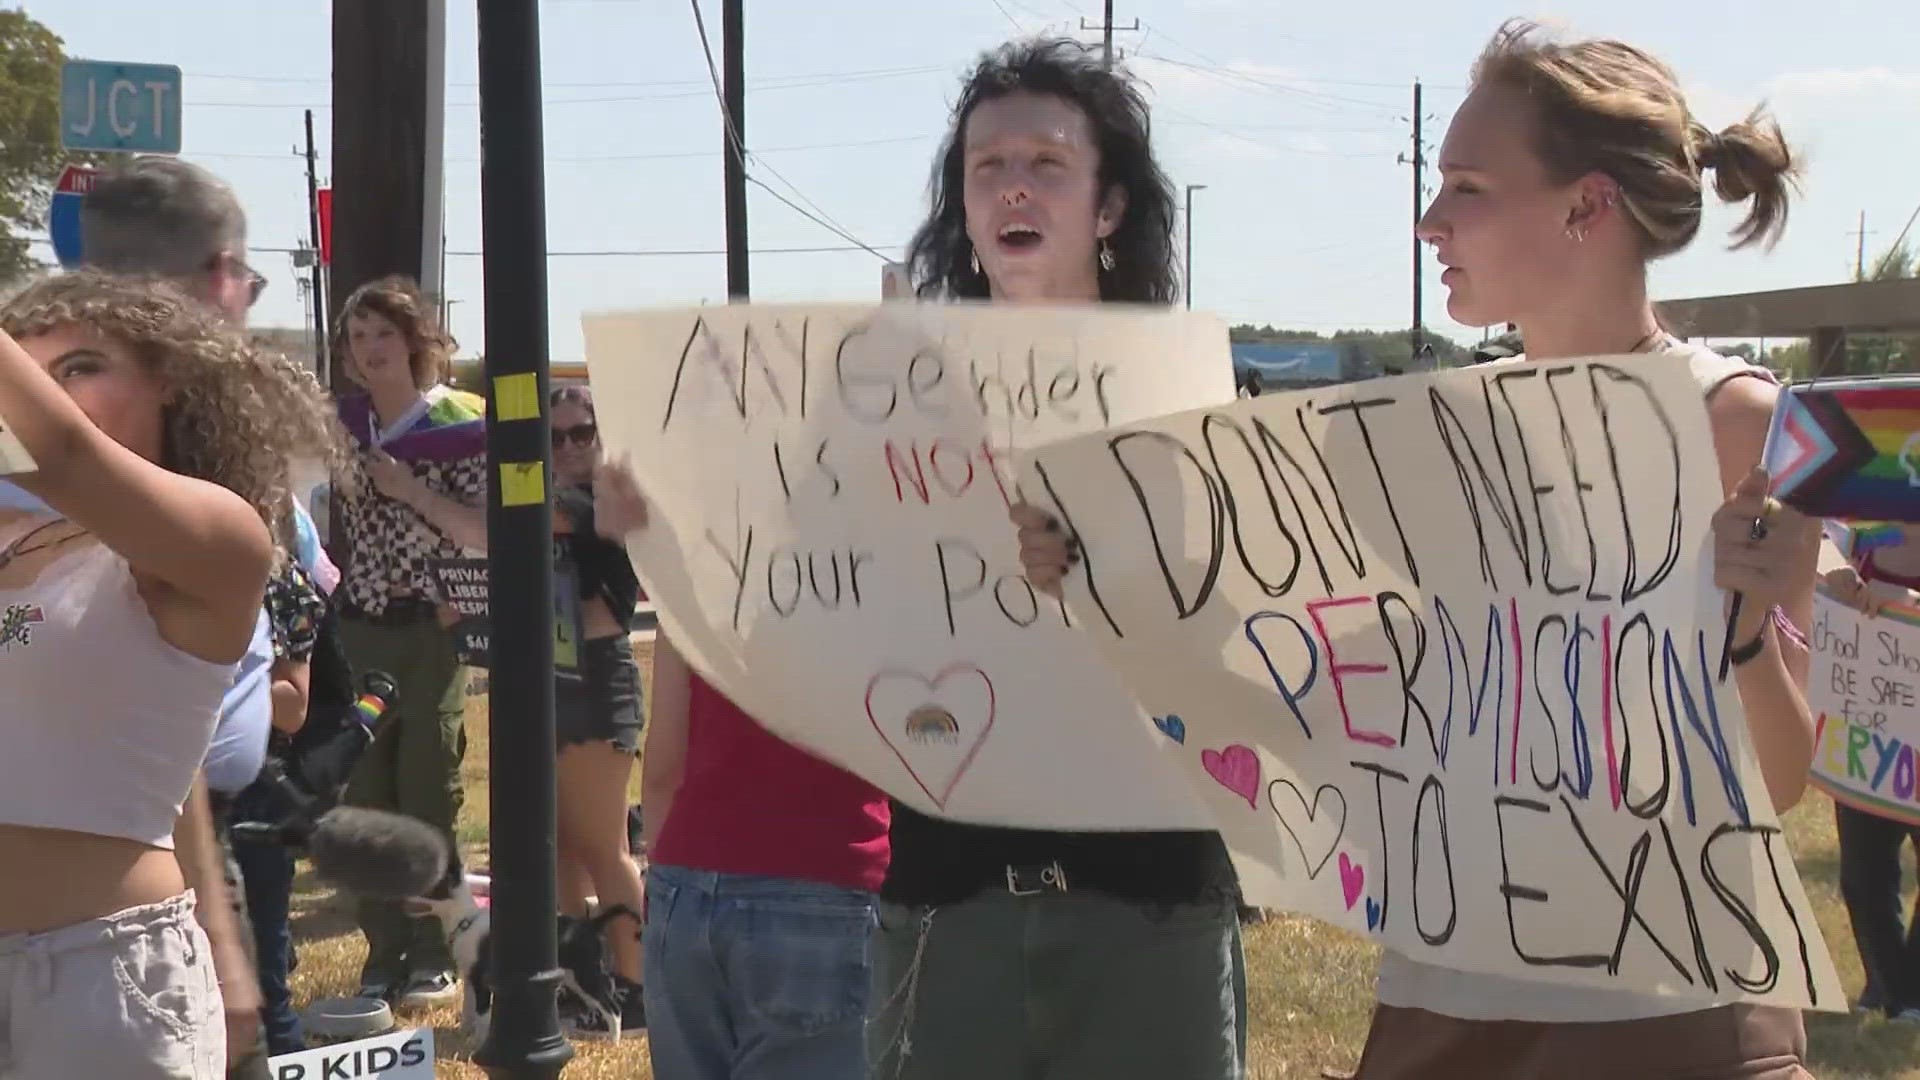 Students, along with parents, gathered outside Katy ISD's central office Wednesday to protest the district's new policy on gender fluidity.